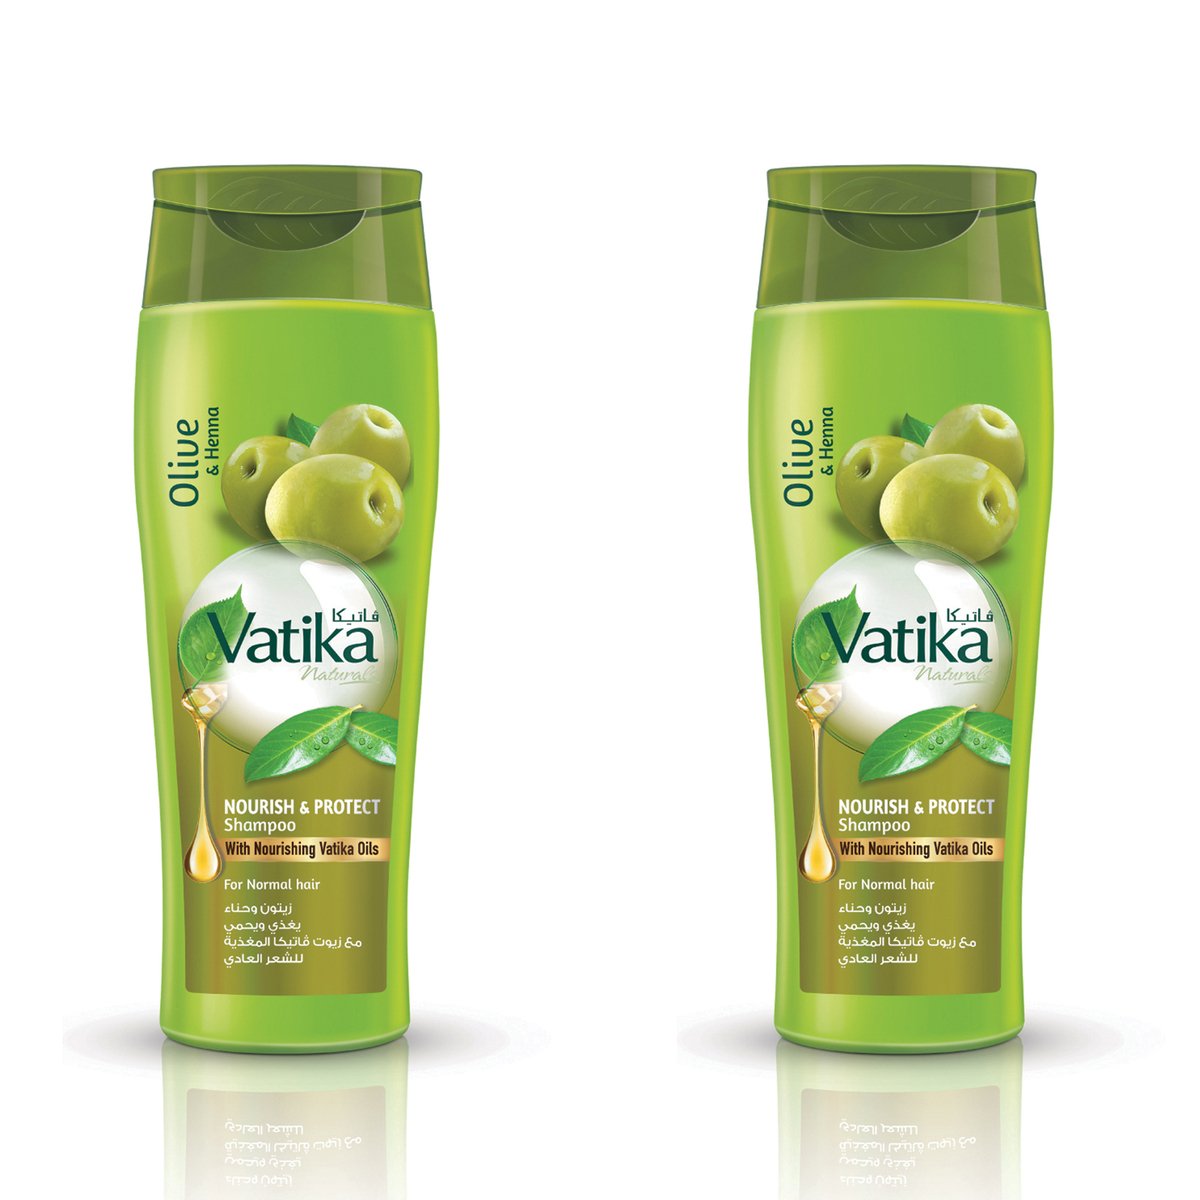 Vatika Naturals Nourish & Protect Shampoo Enriched with Olive & Henna Extracts For Normal Hair With Nourishing Vatika Oils Value Pack 2 x 400 ml